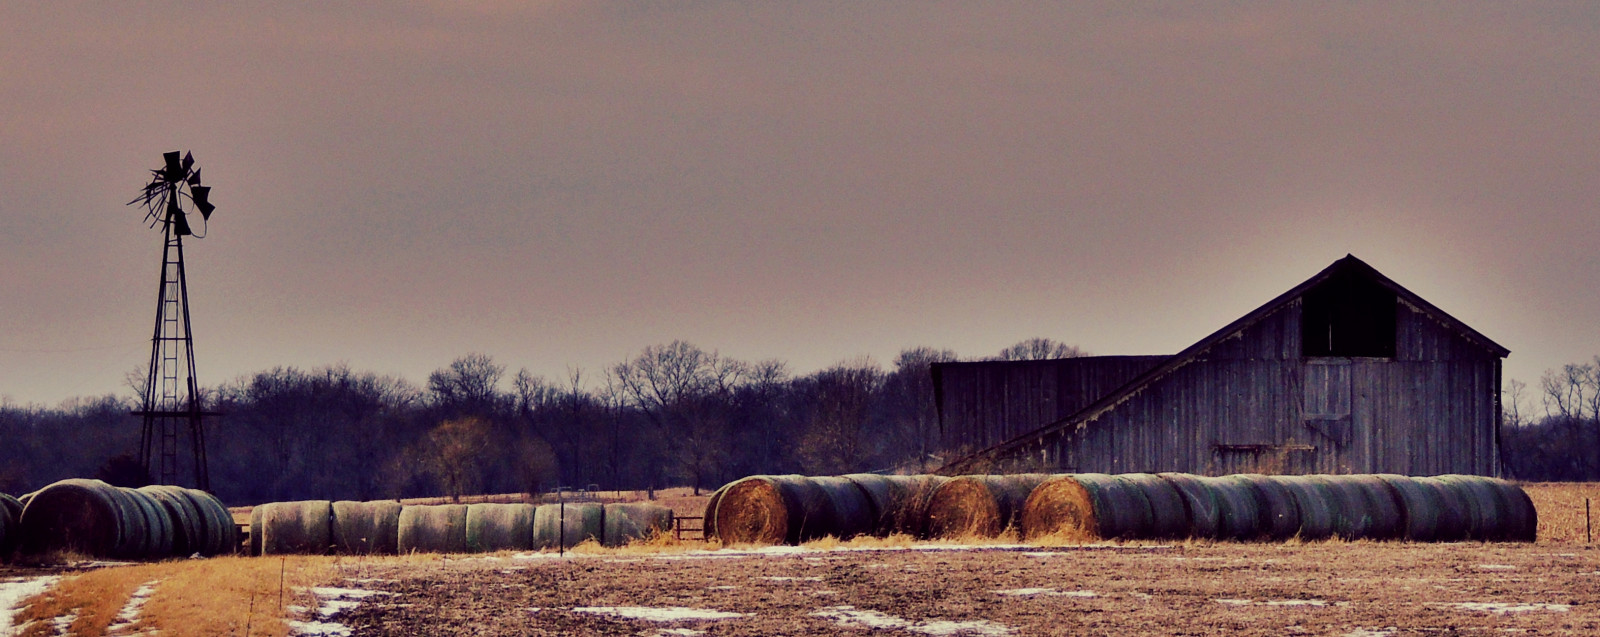 A row of hay bales sit in front of a wooden barn. - Farm